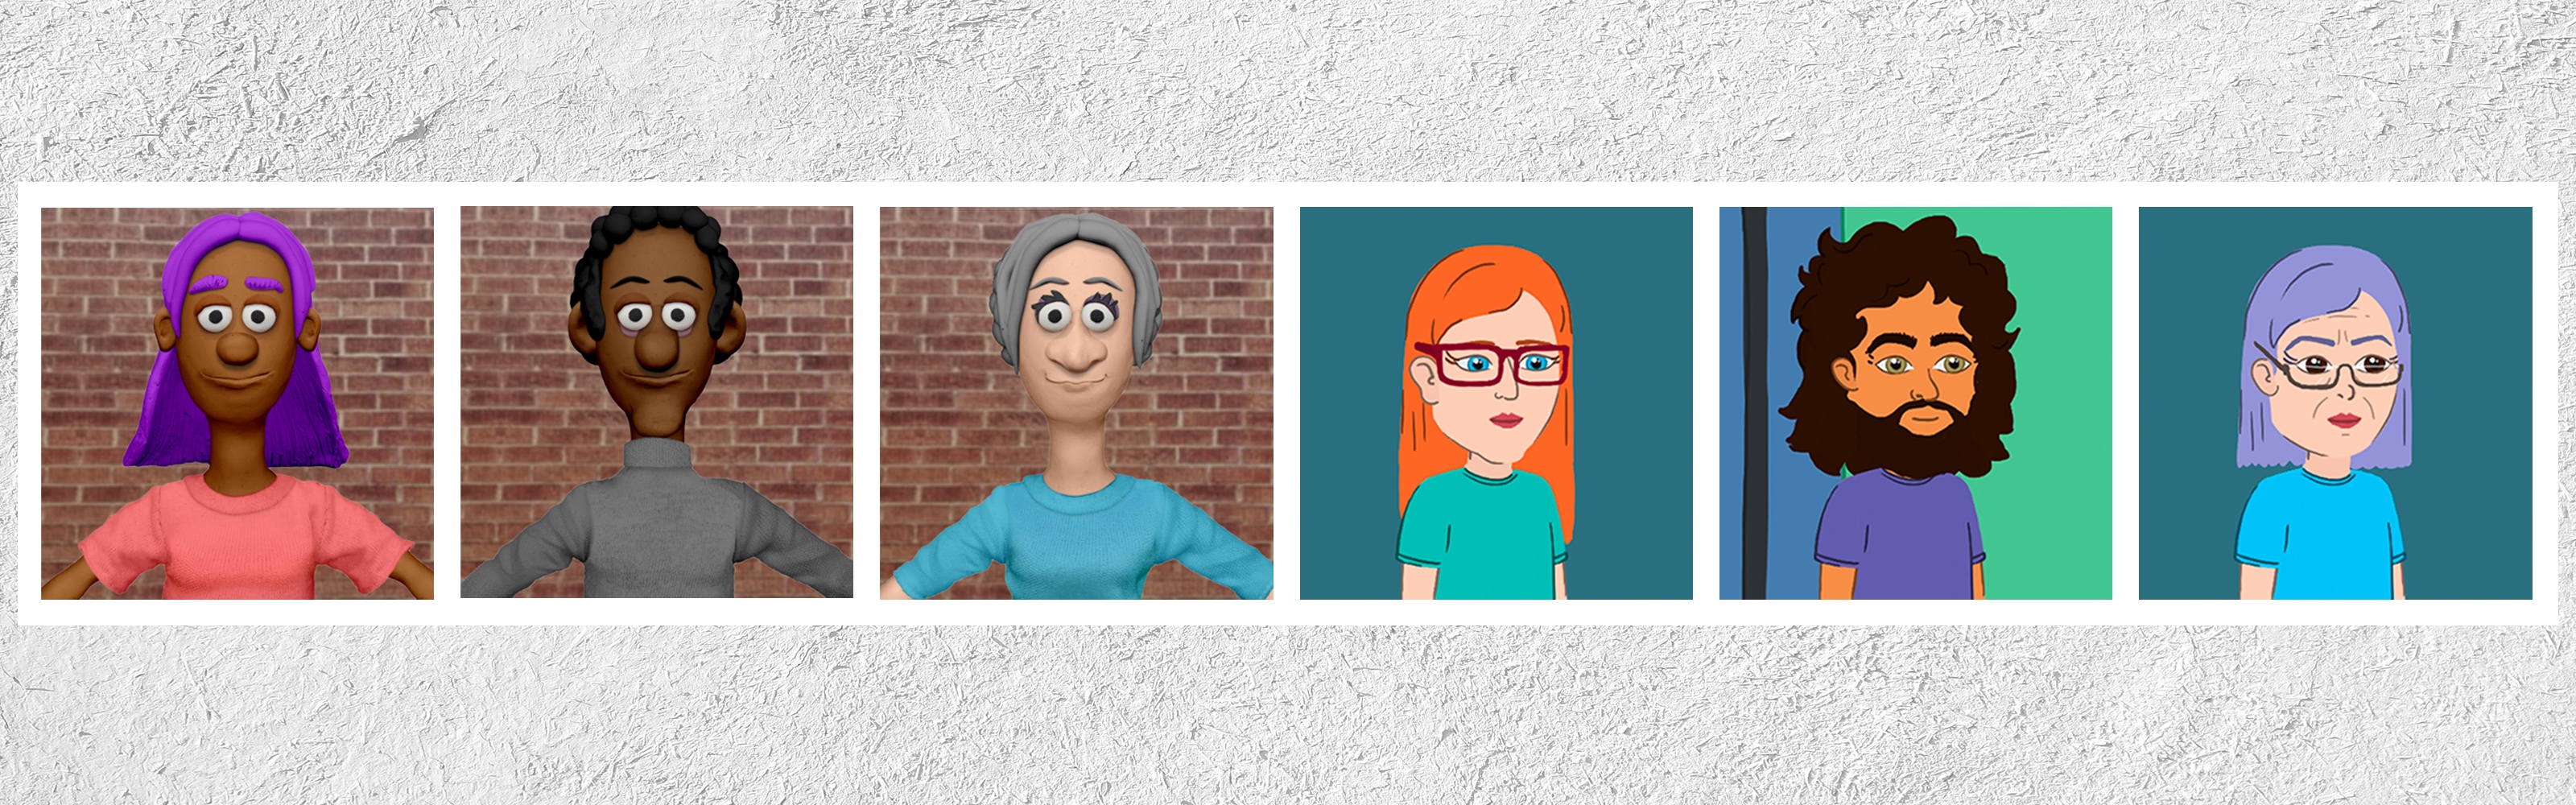 Create an animated avatar today with Adobe Character Animator  Adobe Blog